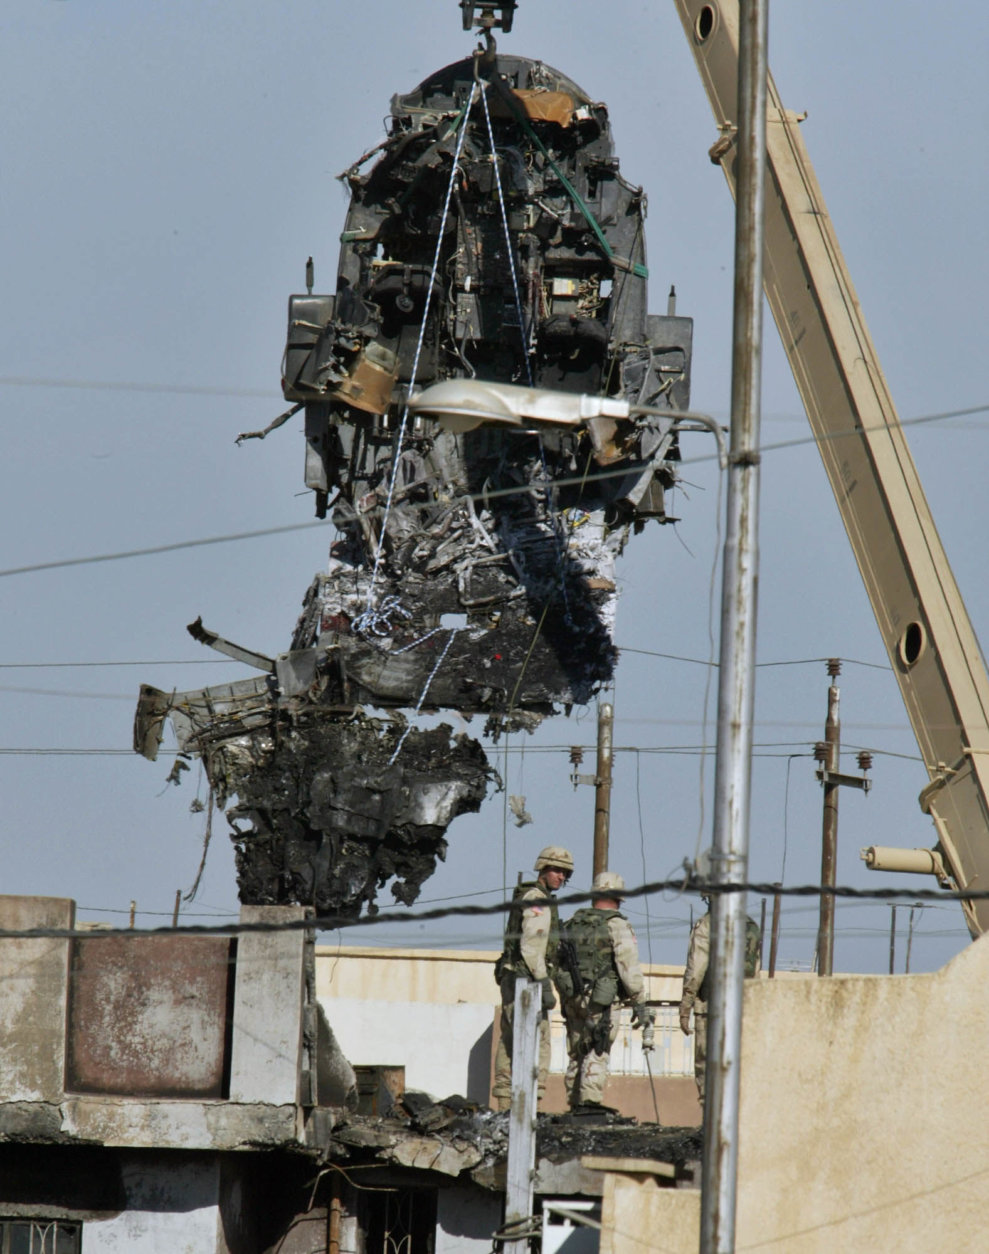 US Army soldiers remove the wreckage of an U.S. Army Black Hawk helicopter, Sunday, Nov 16, 2003 after it crashed into a residential area in Mosul, northern Iraq, late Saturday.  A military spokesman said that the  two helicopters which crashed belonged to the 101st Airborne Division, which controls northern Iraq and that the reasons were not yet clear. At least 17 US Army soldiers where killed. (AP Photo/Anja Niedringhaus)